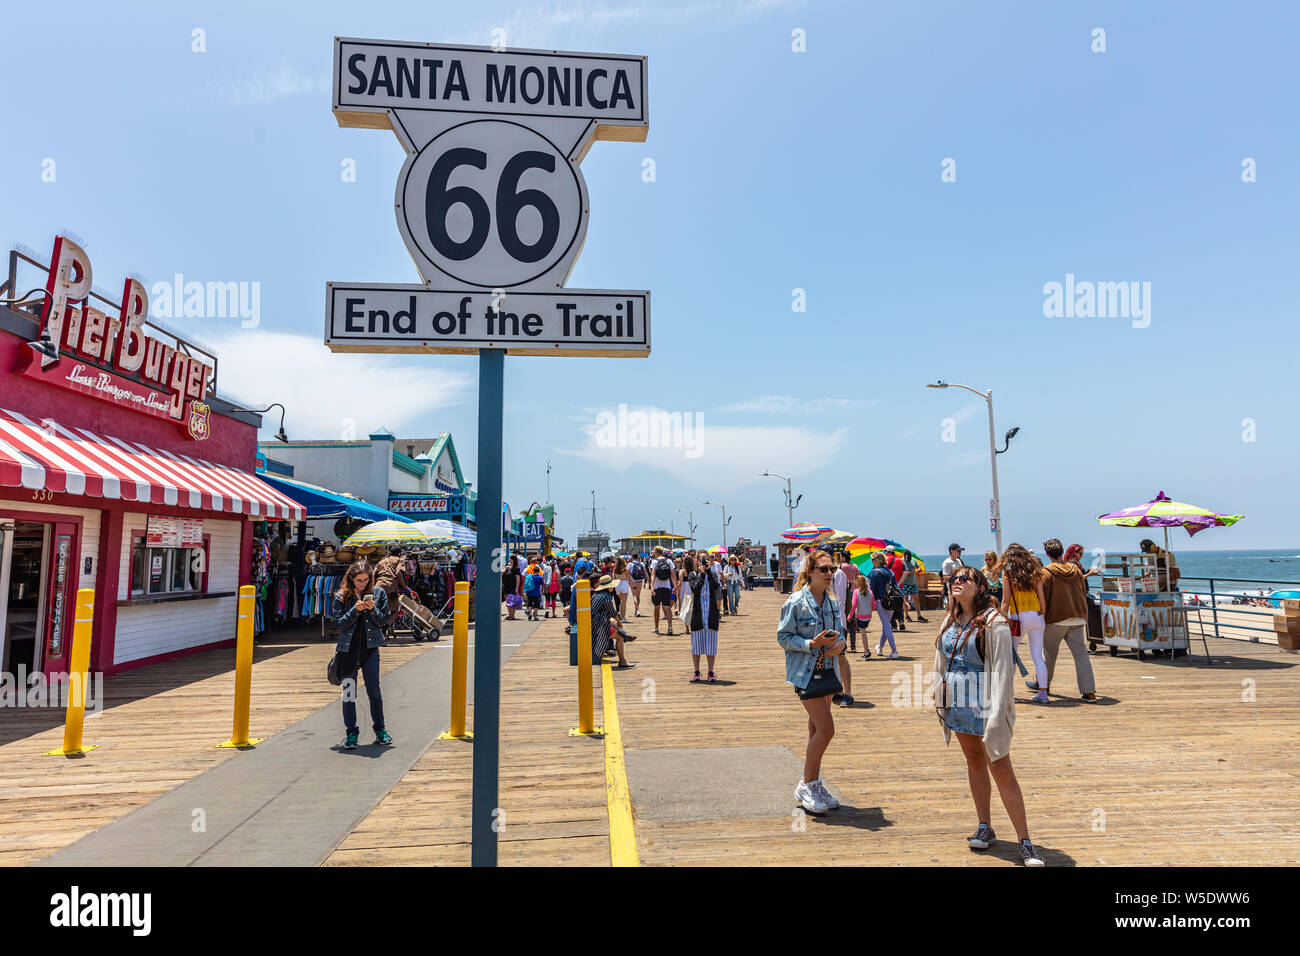 Los Angeles California USA. May 30, 2019. Santa Monica pier and Route 66 End of the trail, white color  sign. People walking at pier, blue sky backgro Stock Photo